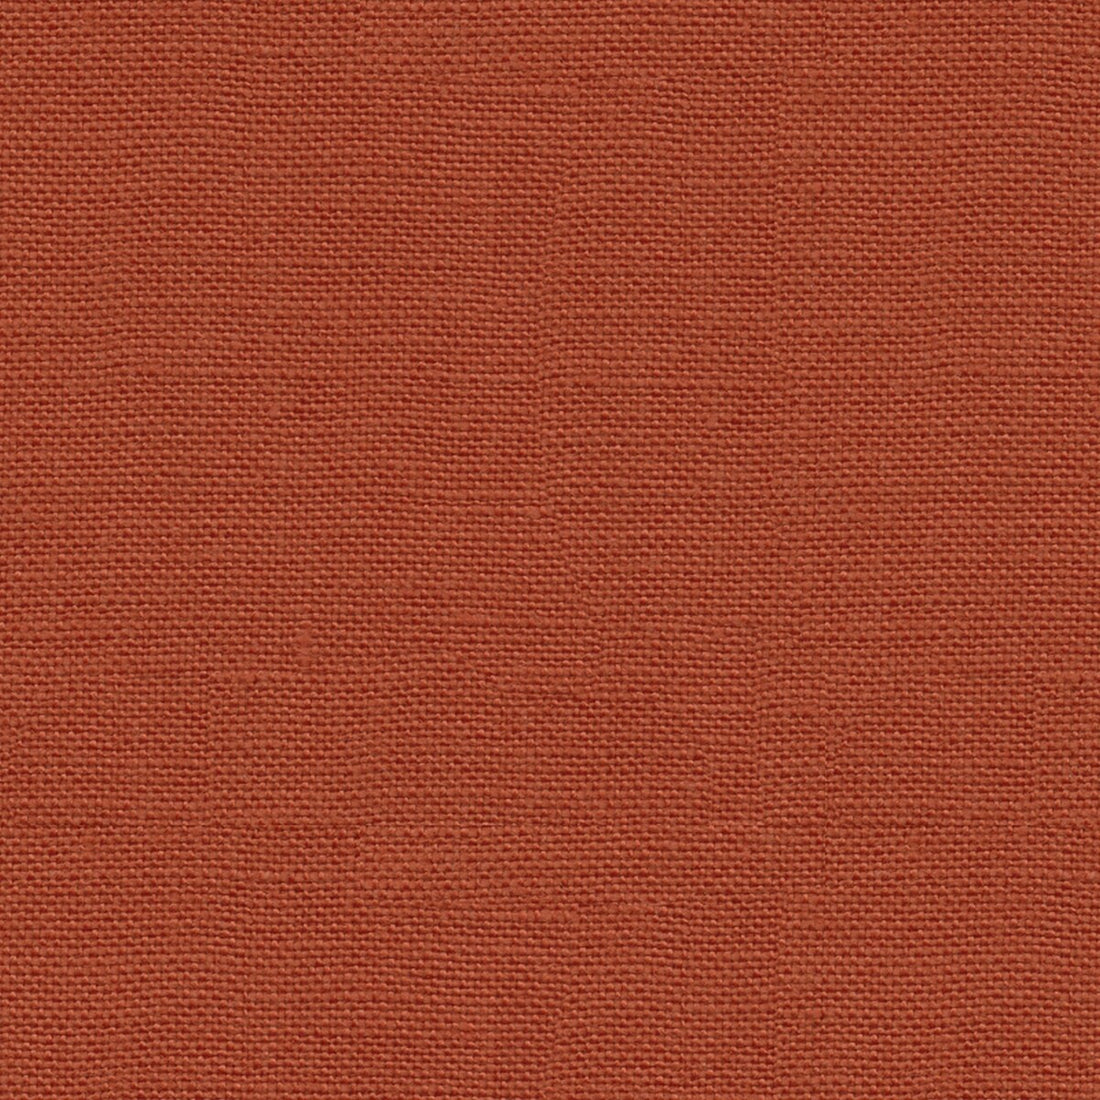 Weekend Linen fabric in paprika color - pattern FD698.V146.0 - by Mulberry in the Country Weekend collection